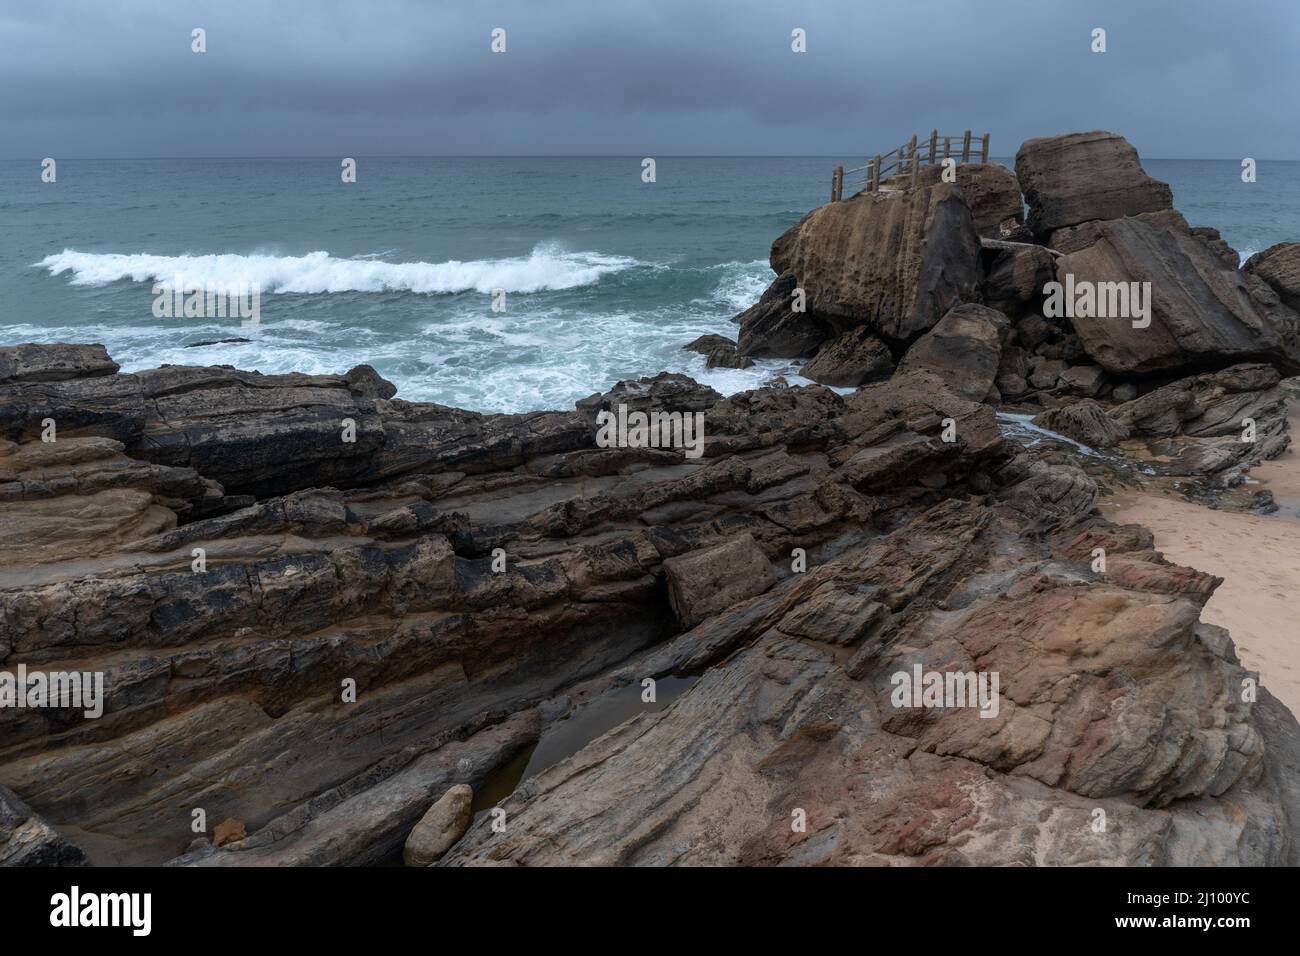 Santa Cruz beach with its famous natural rock formation in winter, Portugal. Stock Photo